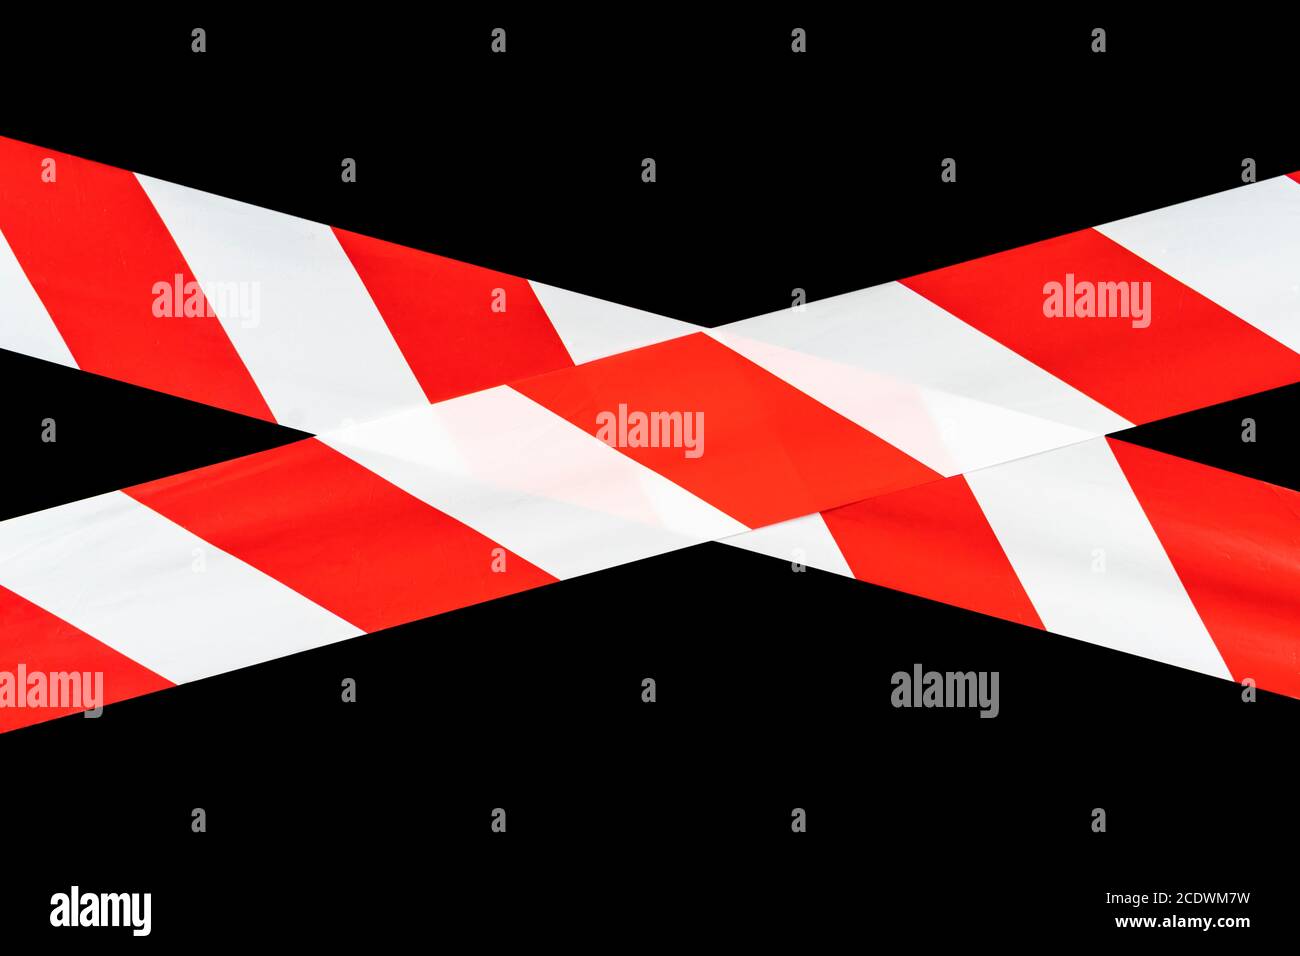 Red and white warning caution tape isolated on black background with clipping path. Red and white lines of barrier tape. Protects for no entry isolate Stock Photo